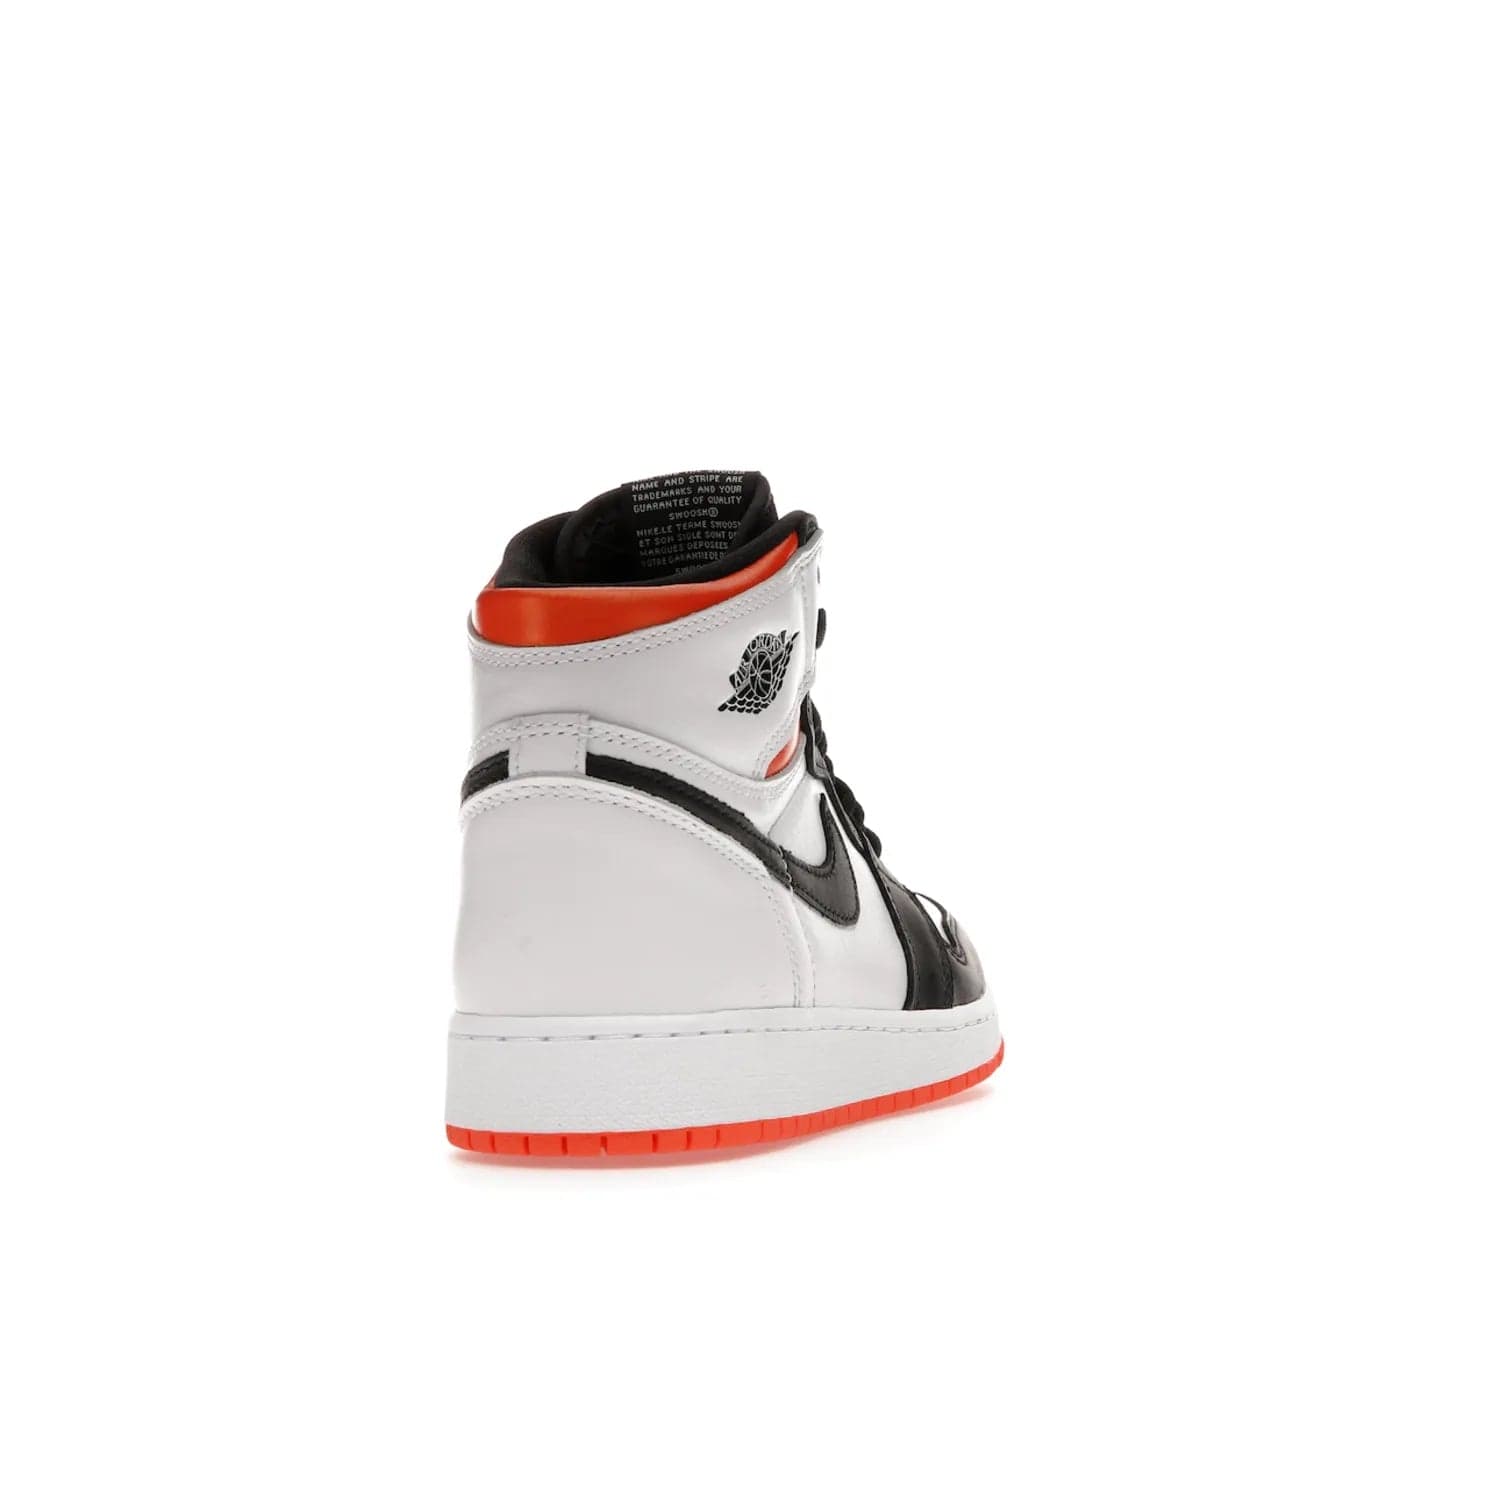 Jordan 1 High OG Electro Orange (GS) - Image 30 - Only at www.BallersClubKickz.com - The Air Jordan 1 High OG Electro Orange GS is the ideal shoe for kids on the go. Featuring white leather uppers, black overlays, and bright orange accents, it's sure to become a favorite. A great mix of classic style and vibrant colors, the shoe delivers air cushioning for comfort and hard orange rubber for grip. Release on July 17th, 2021. Get them a pair today.